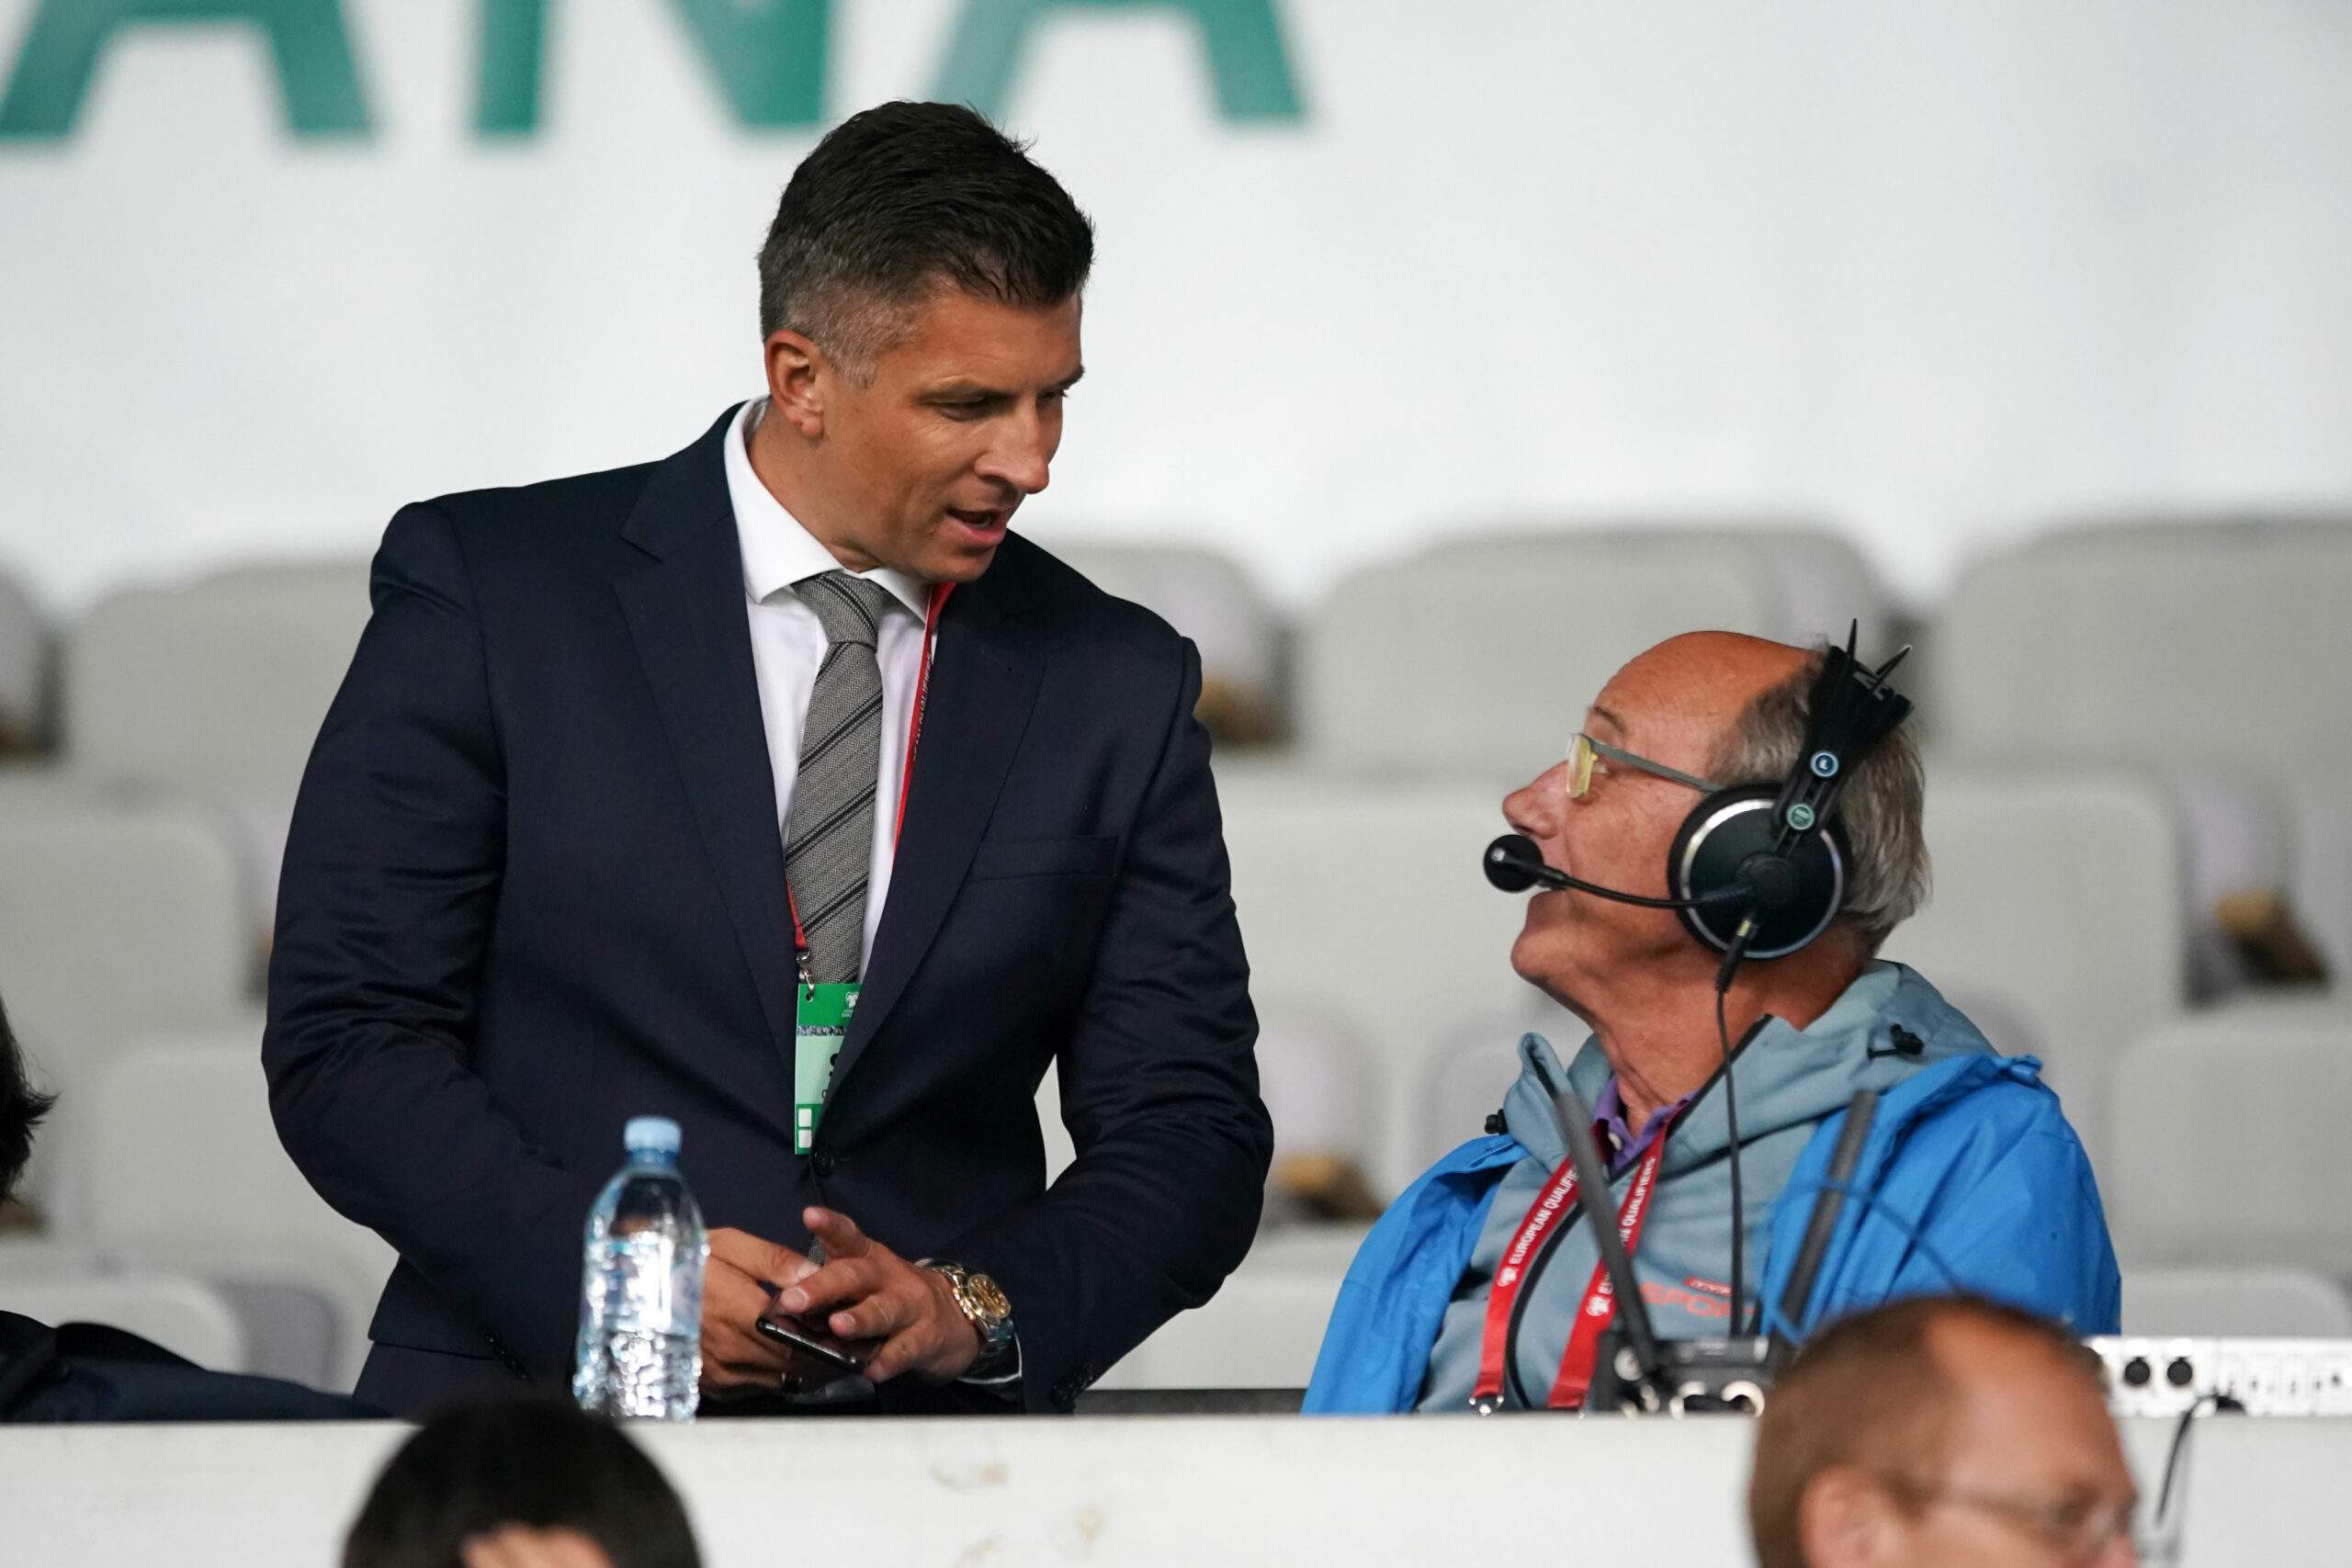 Who will commentate the matches of the 2022 World Cup? [ROZPISKA KOMENTATORÓW]